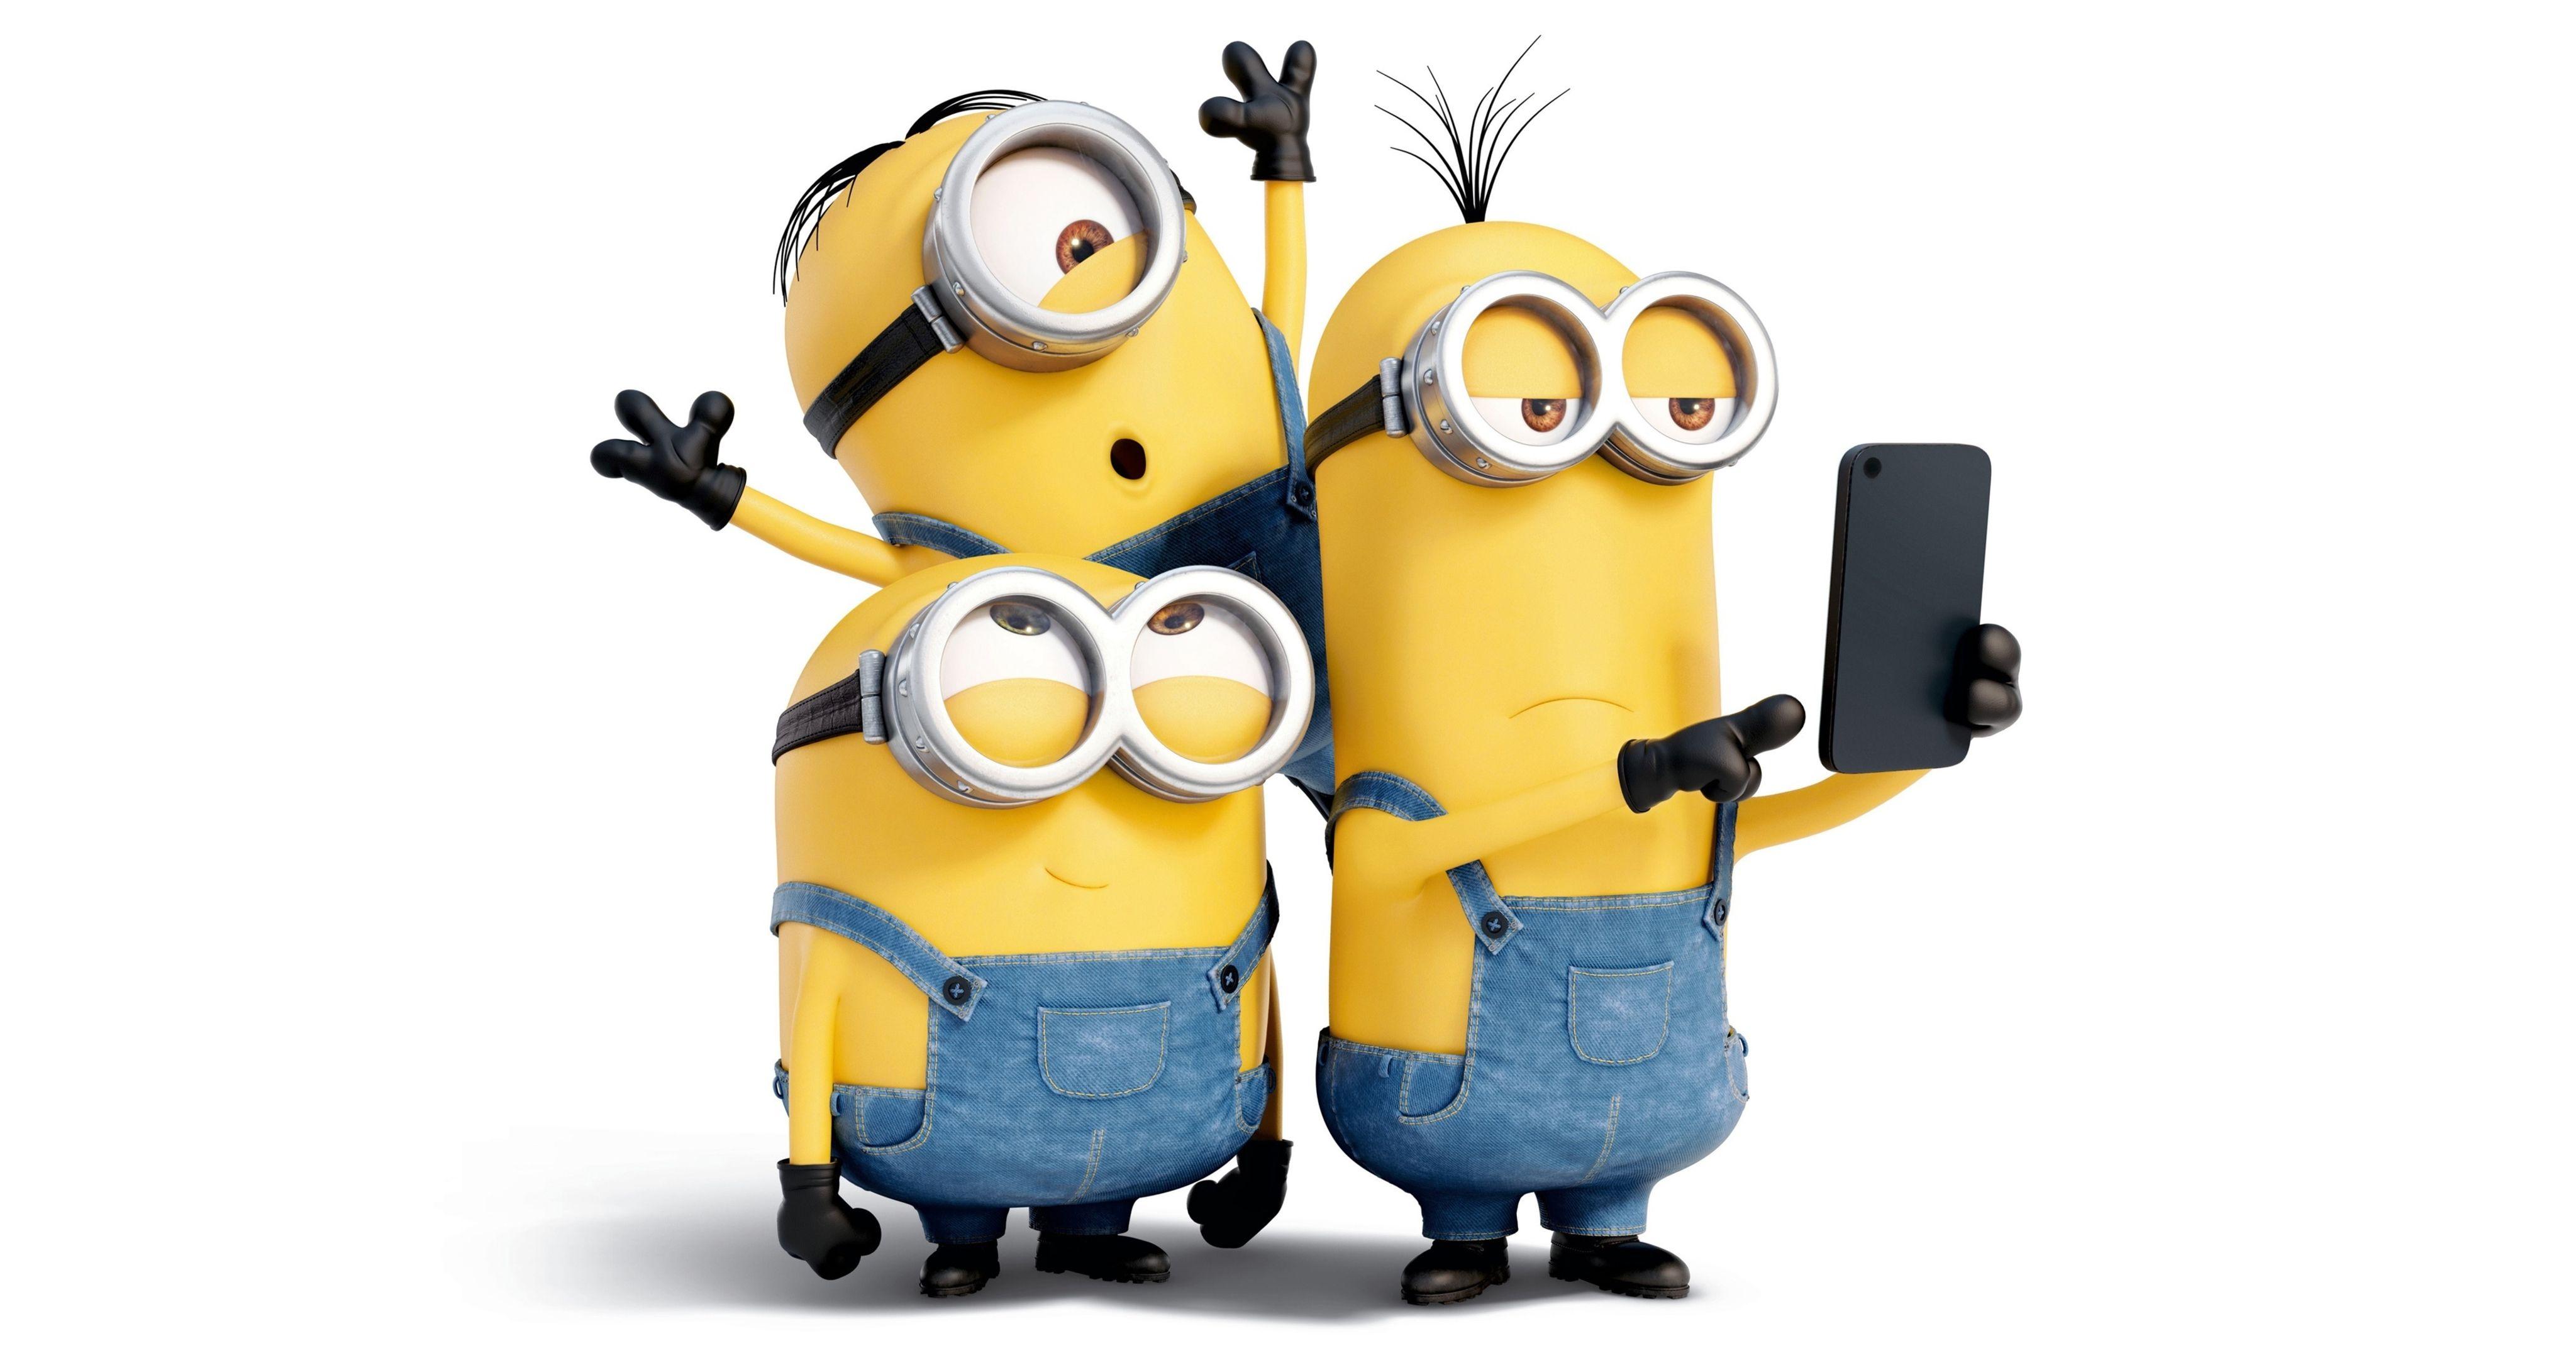 Hd Wallpapers Of Minions - Wallpaper Cave